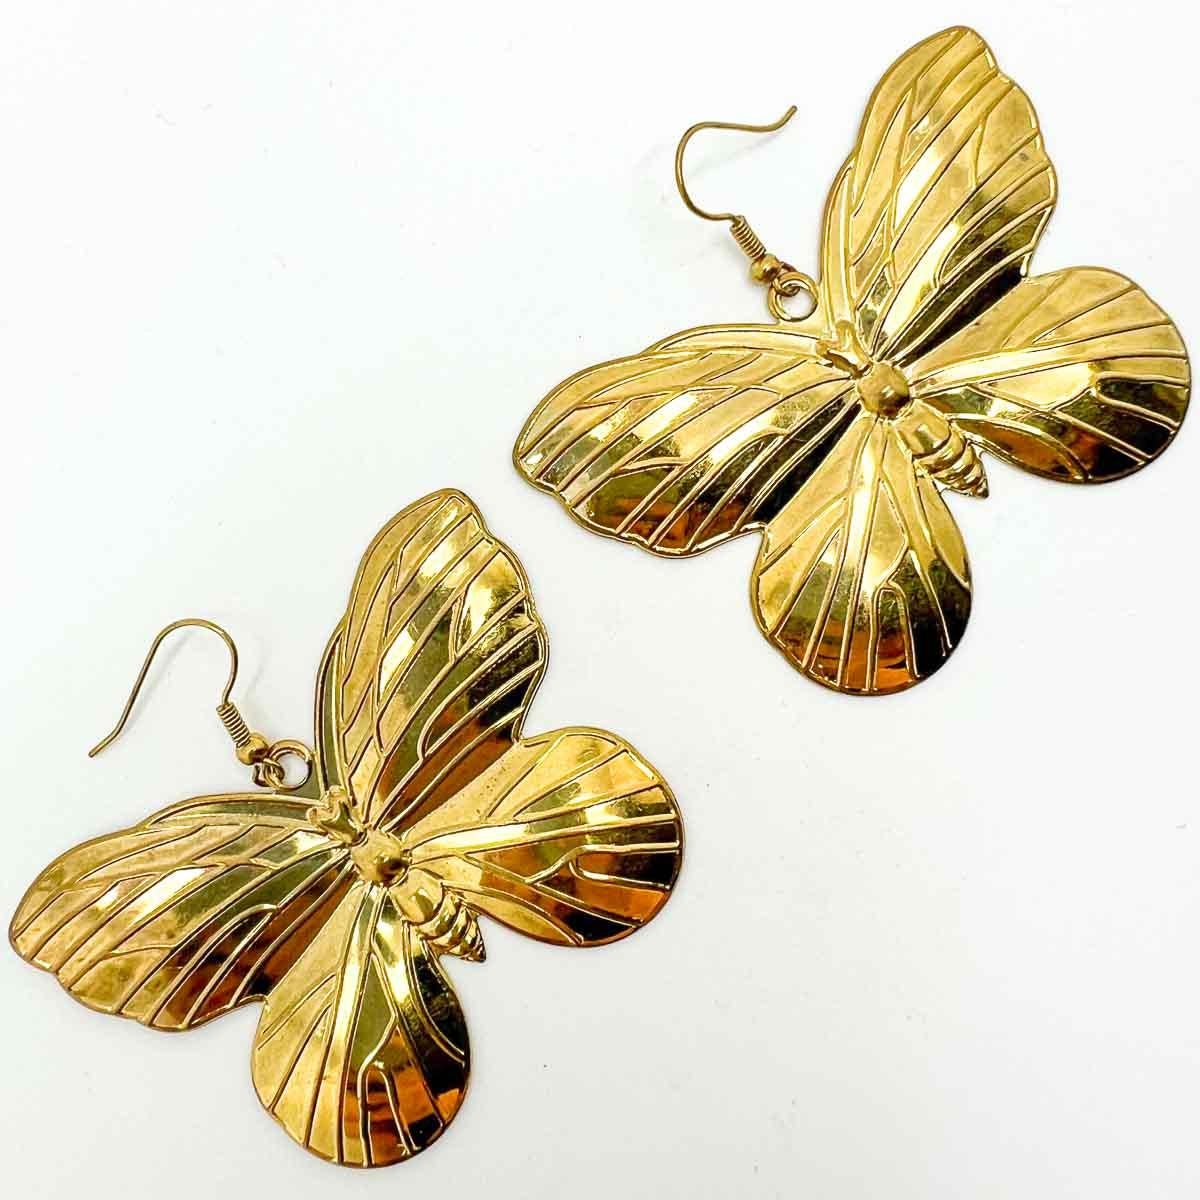 A whimsical pair of preloved Butterfly Statement Earrings. The perfect summer statement that will work, day to occasion and even for the beach.
An unsigned beauty. A rare treasure. Just because a jewel doesn’t carry a designer name, doesn’t mean it